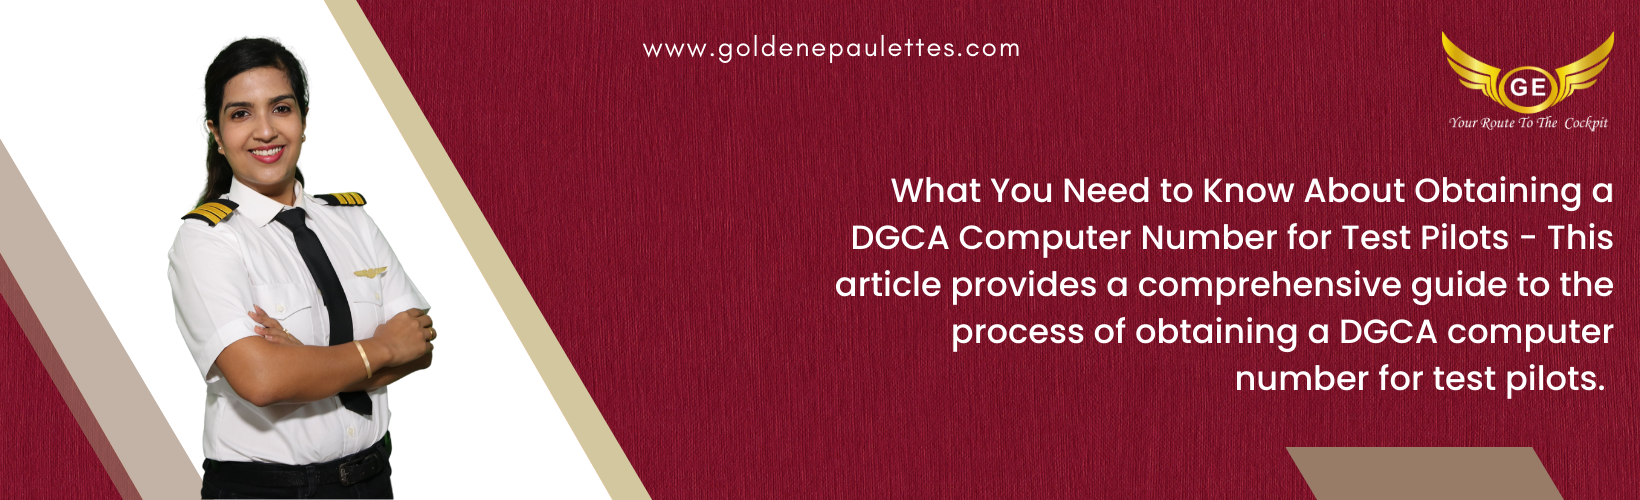 What You Need to Know About Obtaining a DGCA Computer Number for Test Pilots